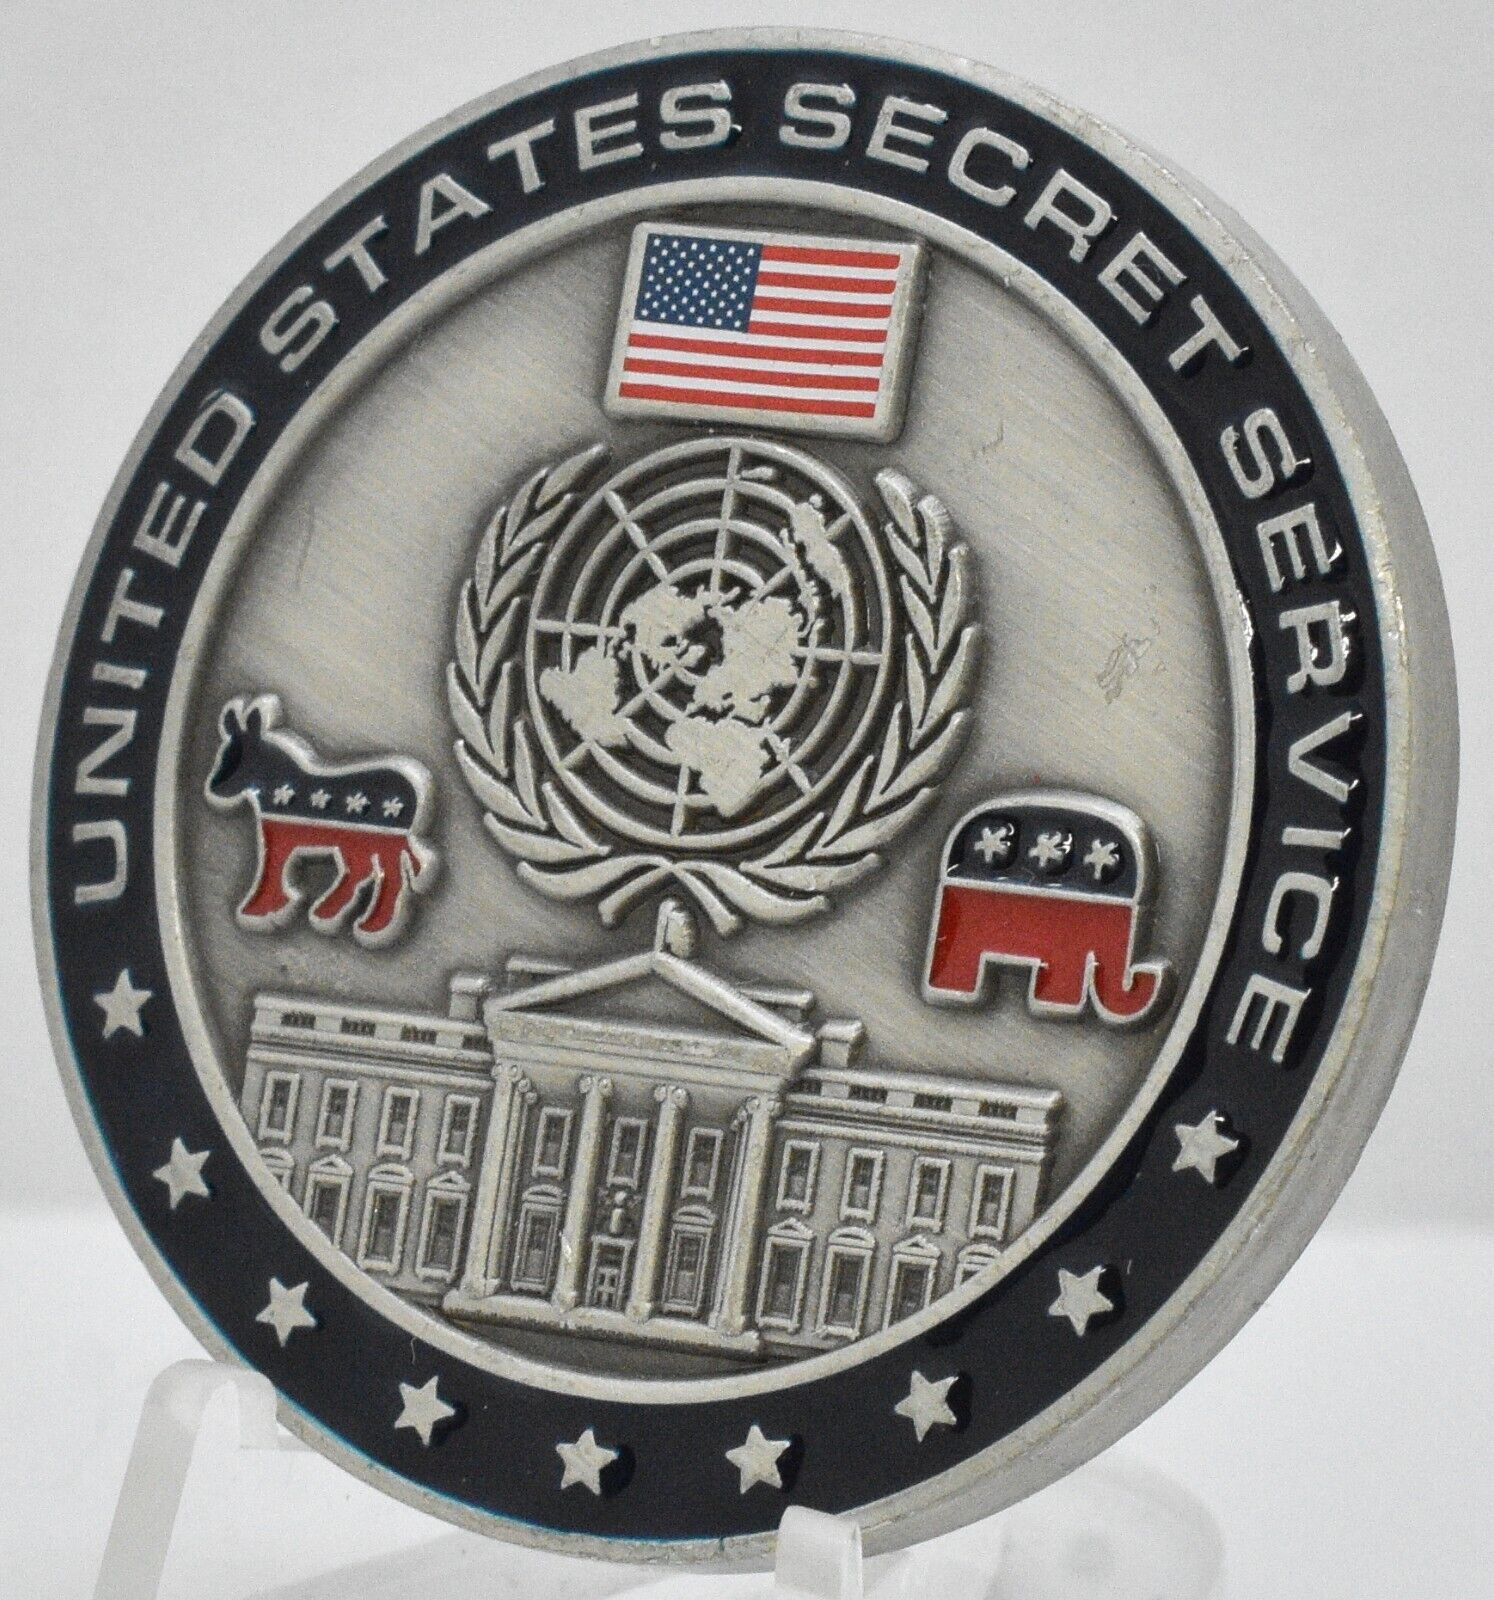 Secret Service Dignitary Protective Division DPD Challenge Coin